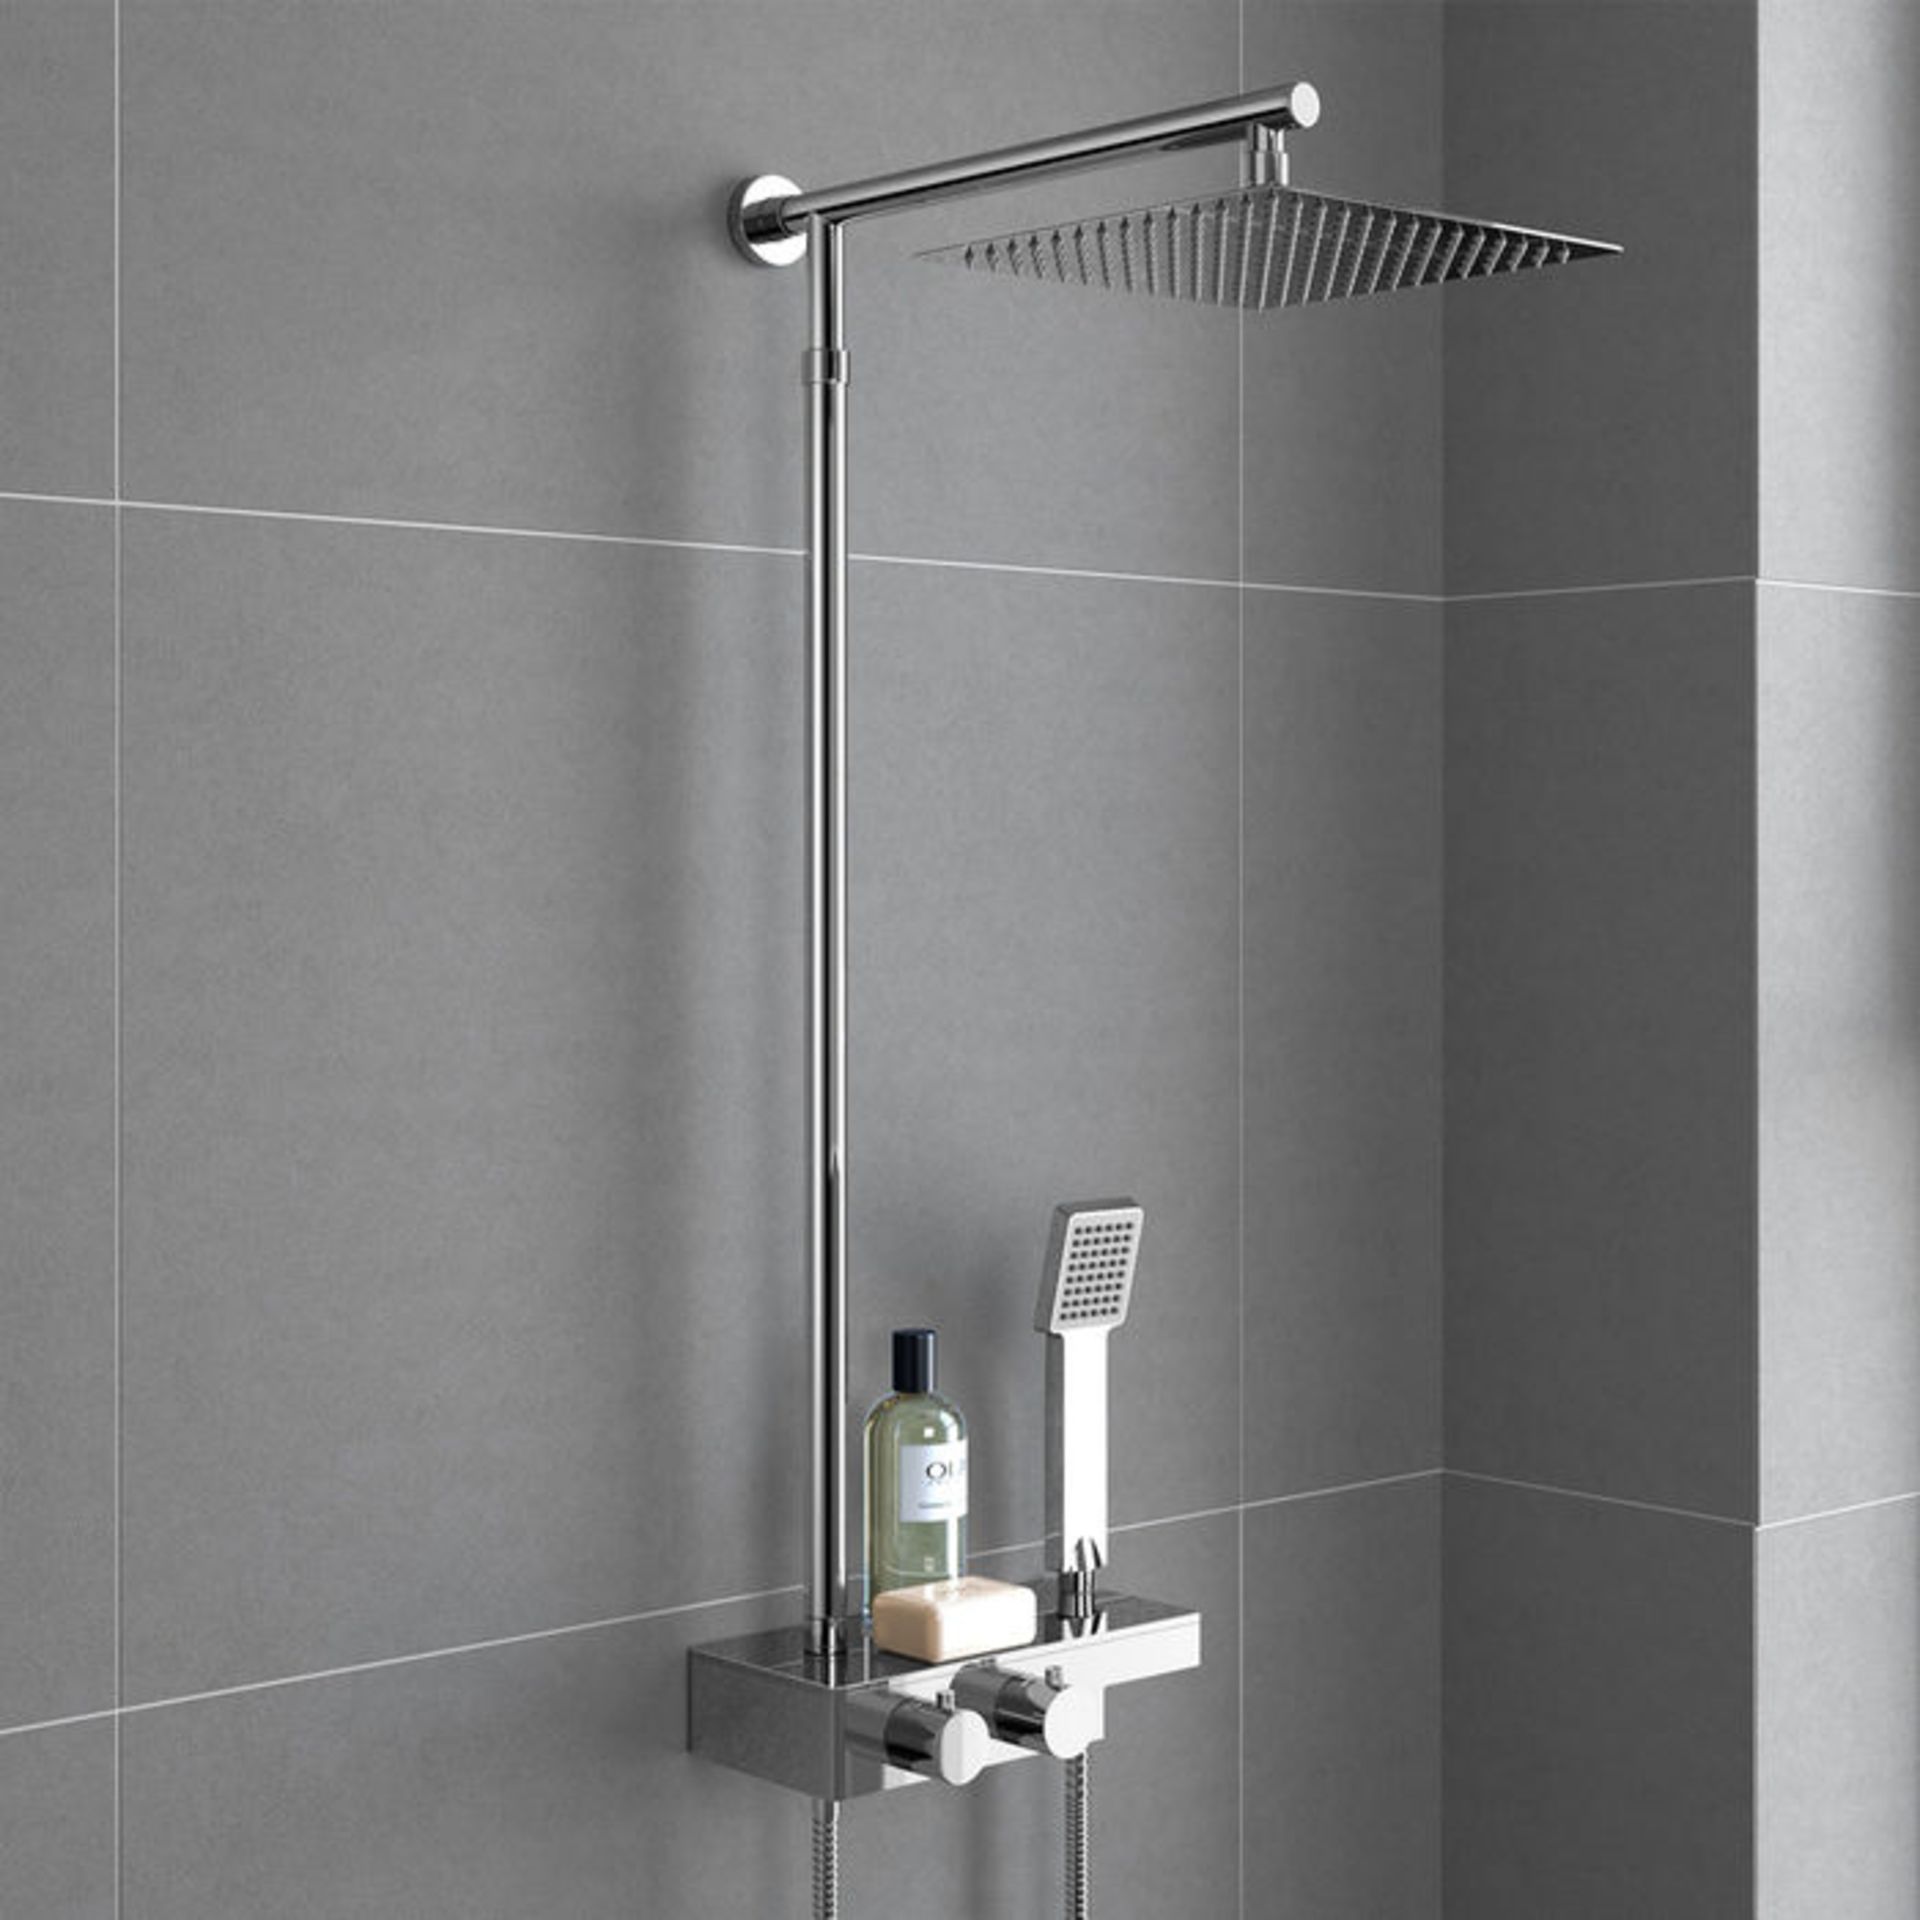 (CT228) Square Exposed Thermostatic Shower Shelf - Image 8 of 8